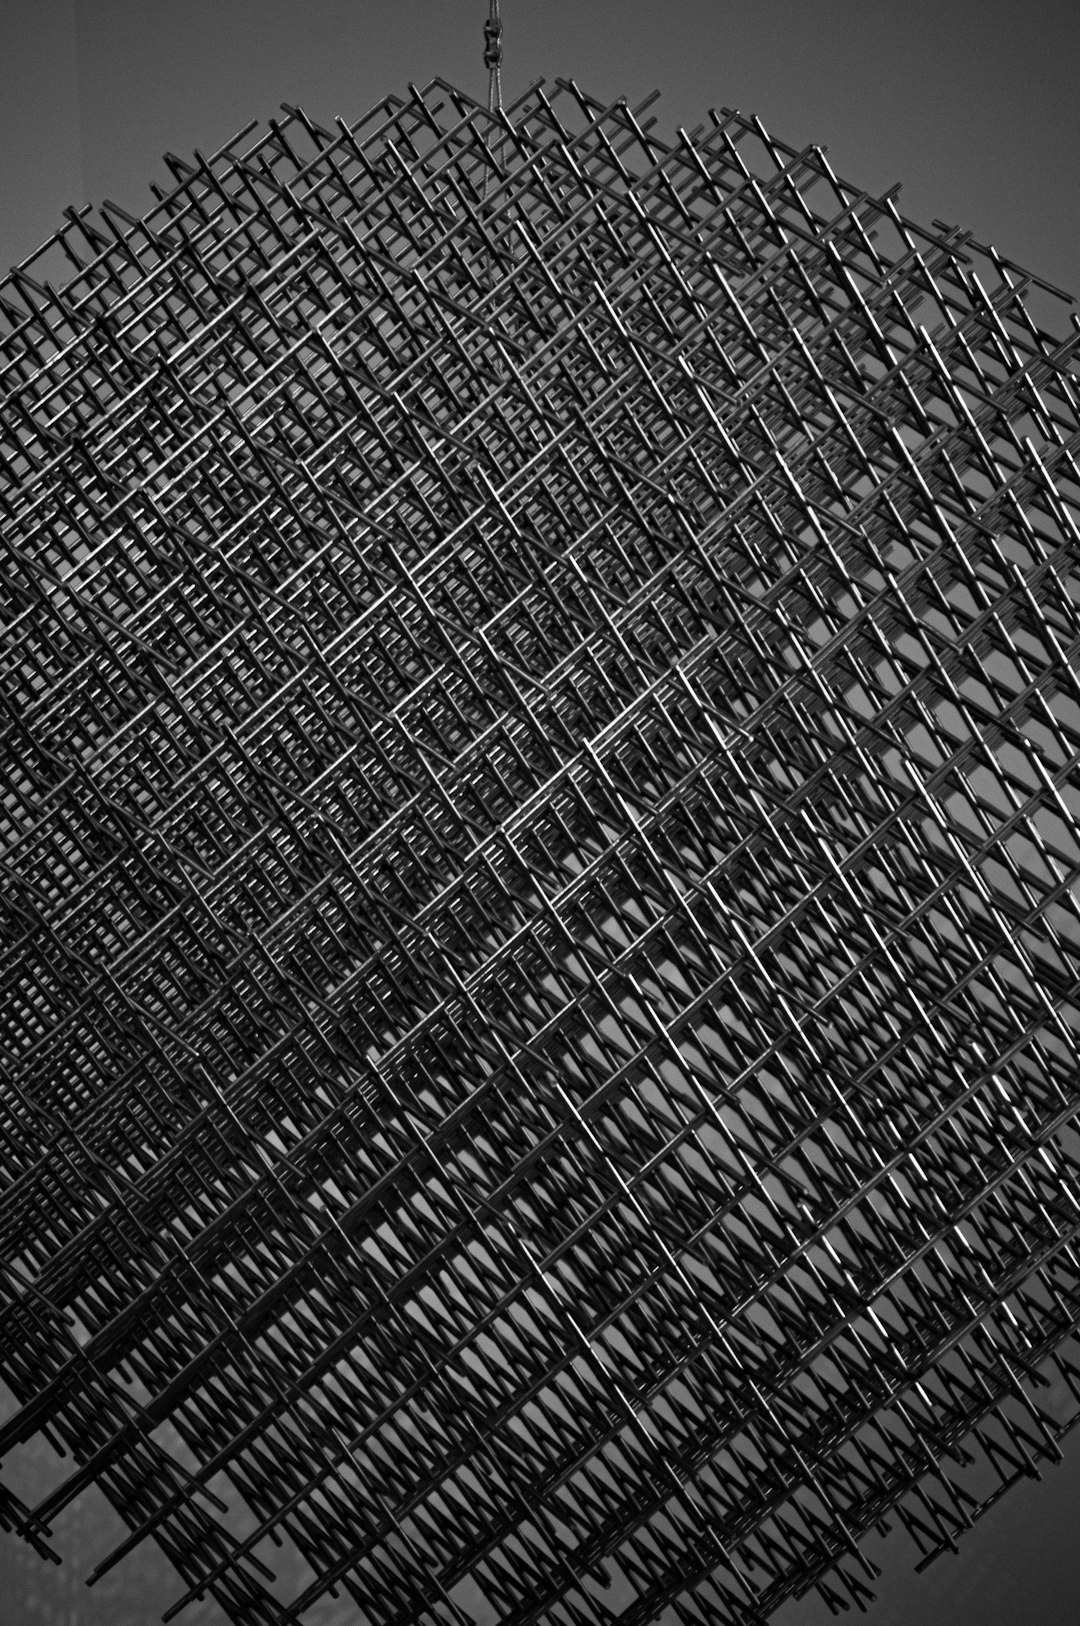 black and white textile in close up photography